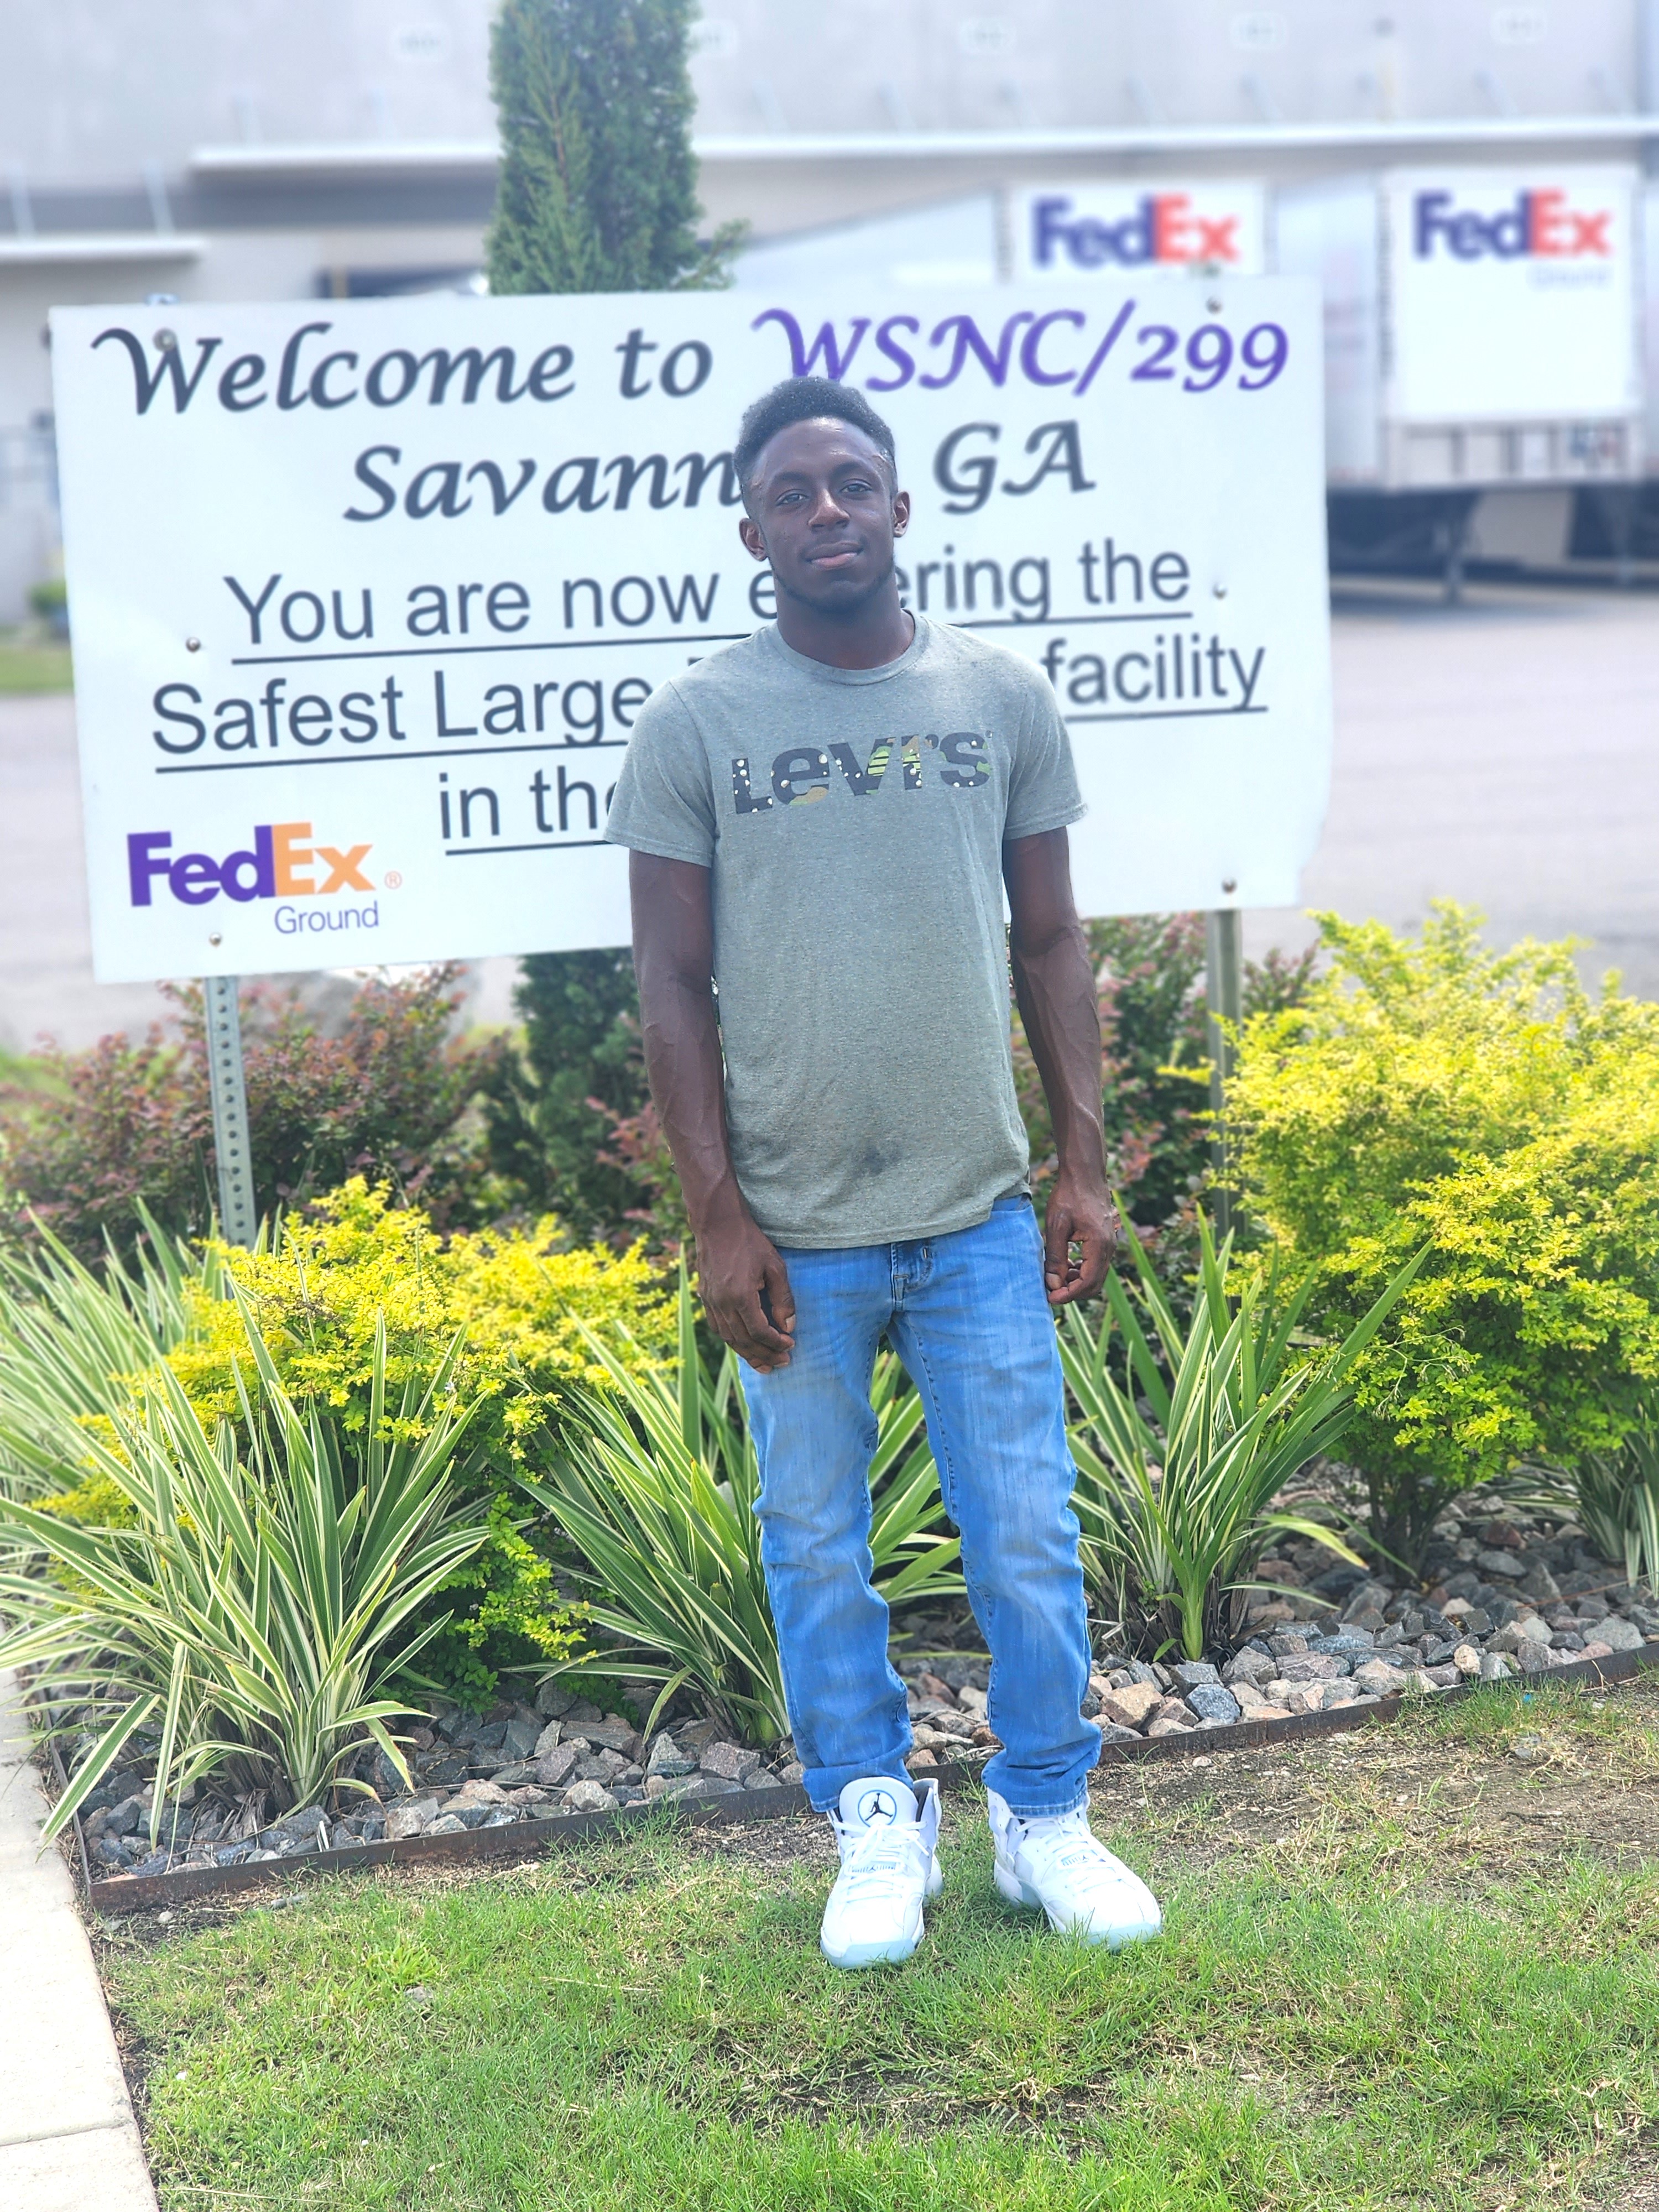 Nathan standing in front of a Welcome to FedEx Savannah, GA sign